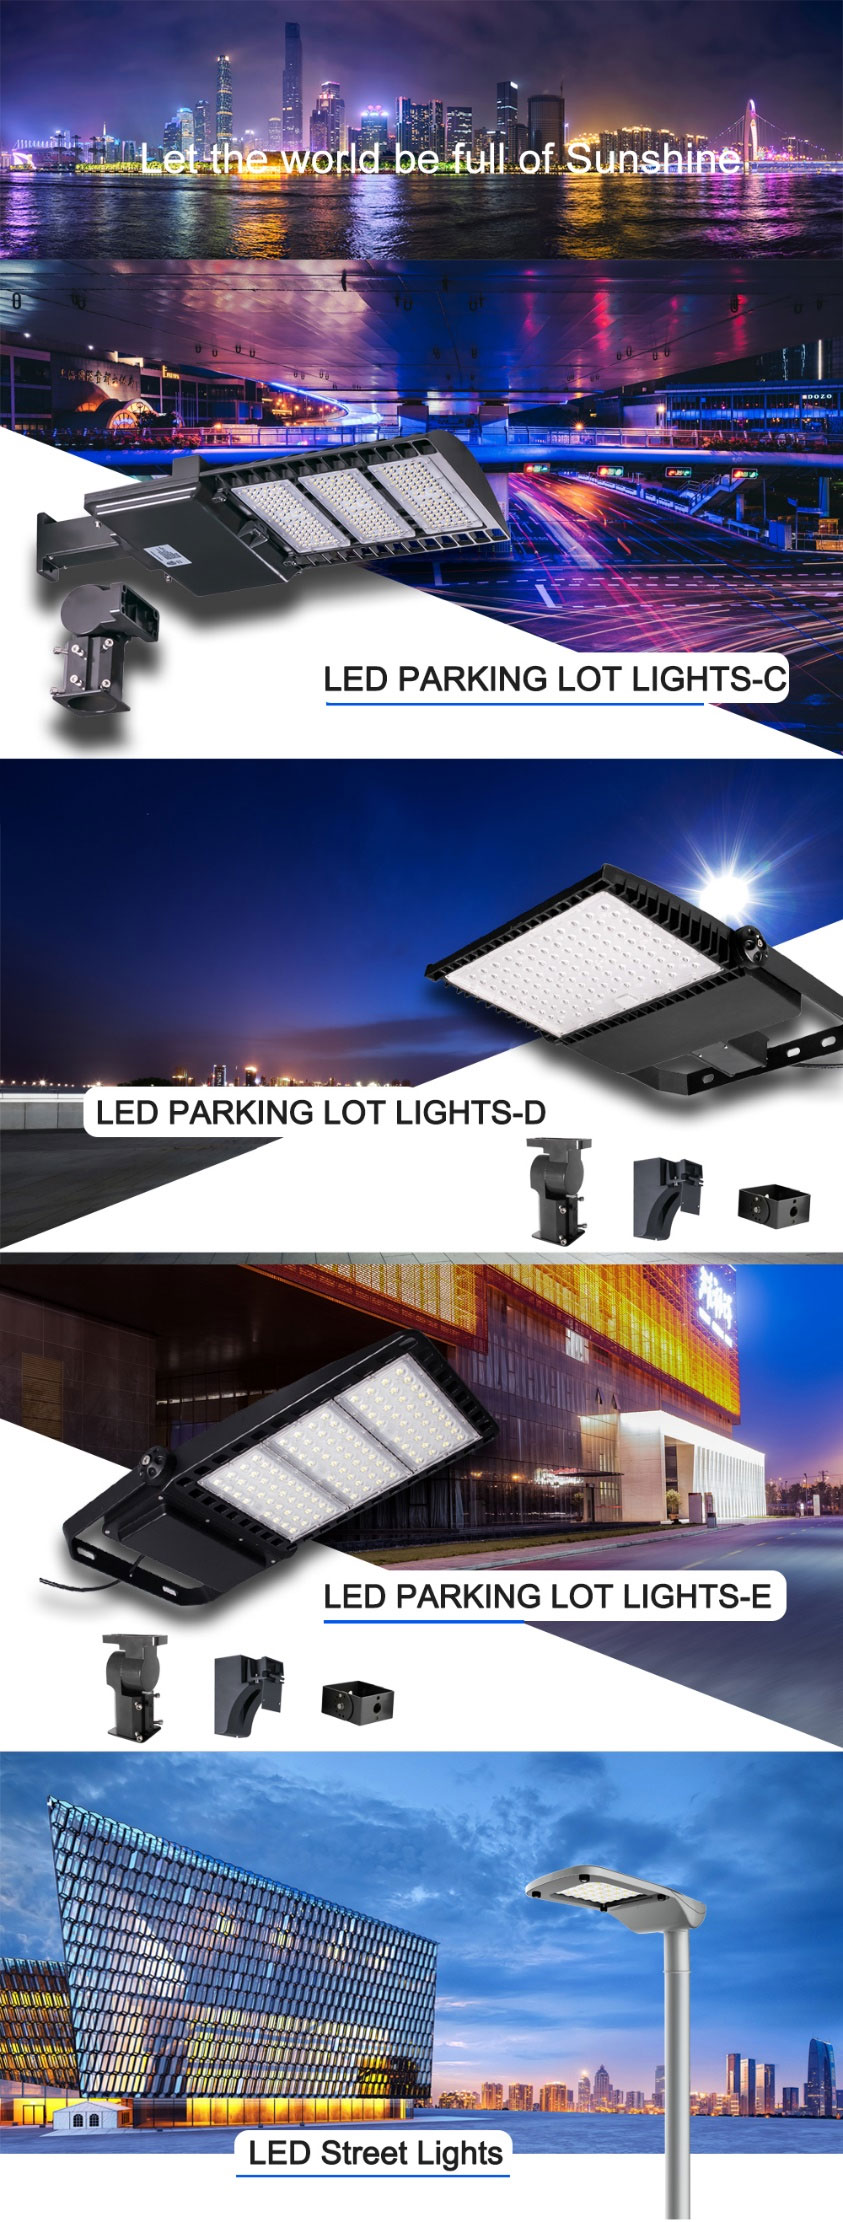 Analysis of market size and development trend of global LED lighting industry in 2022